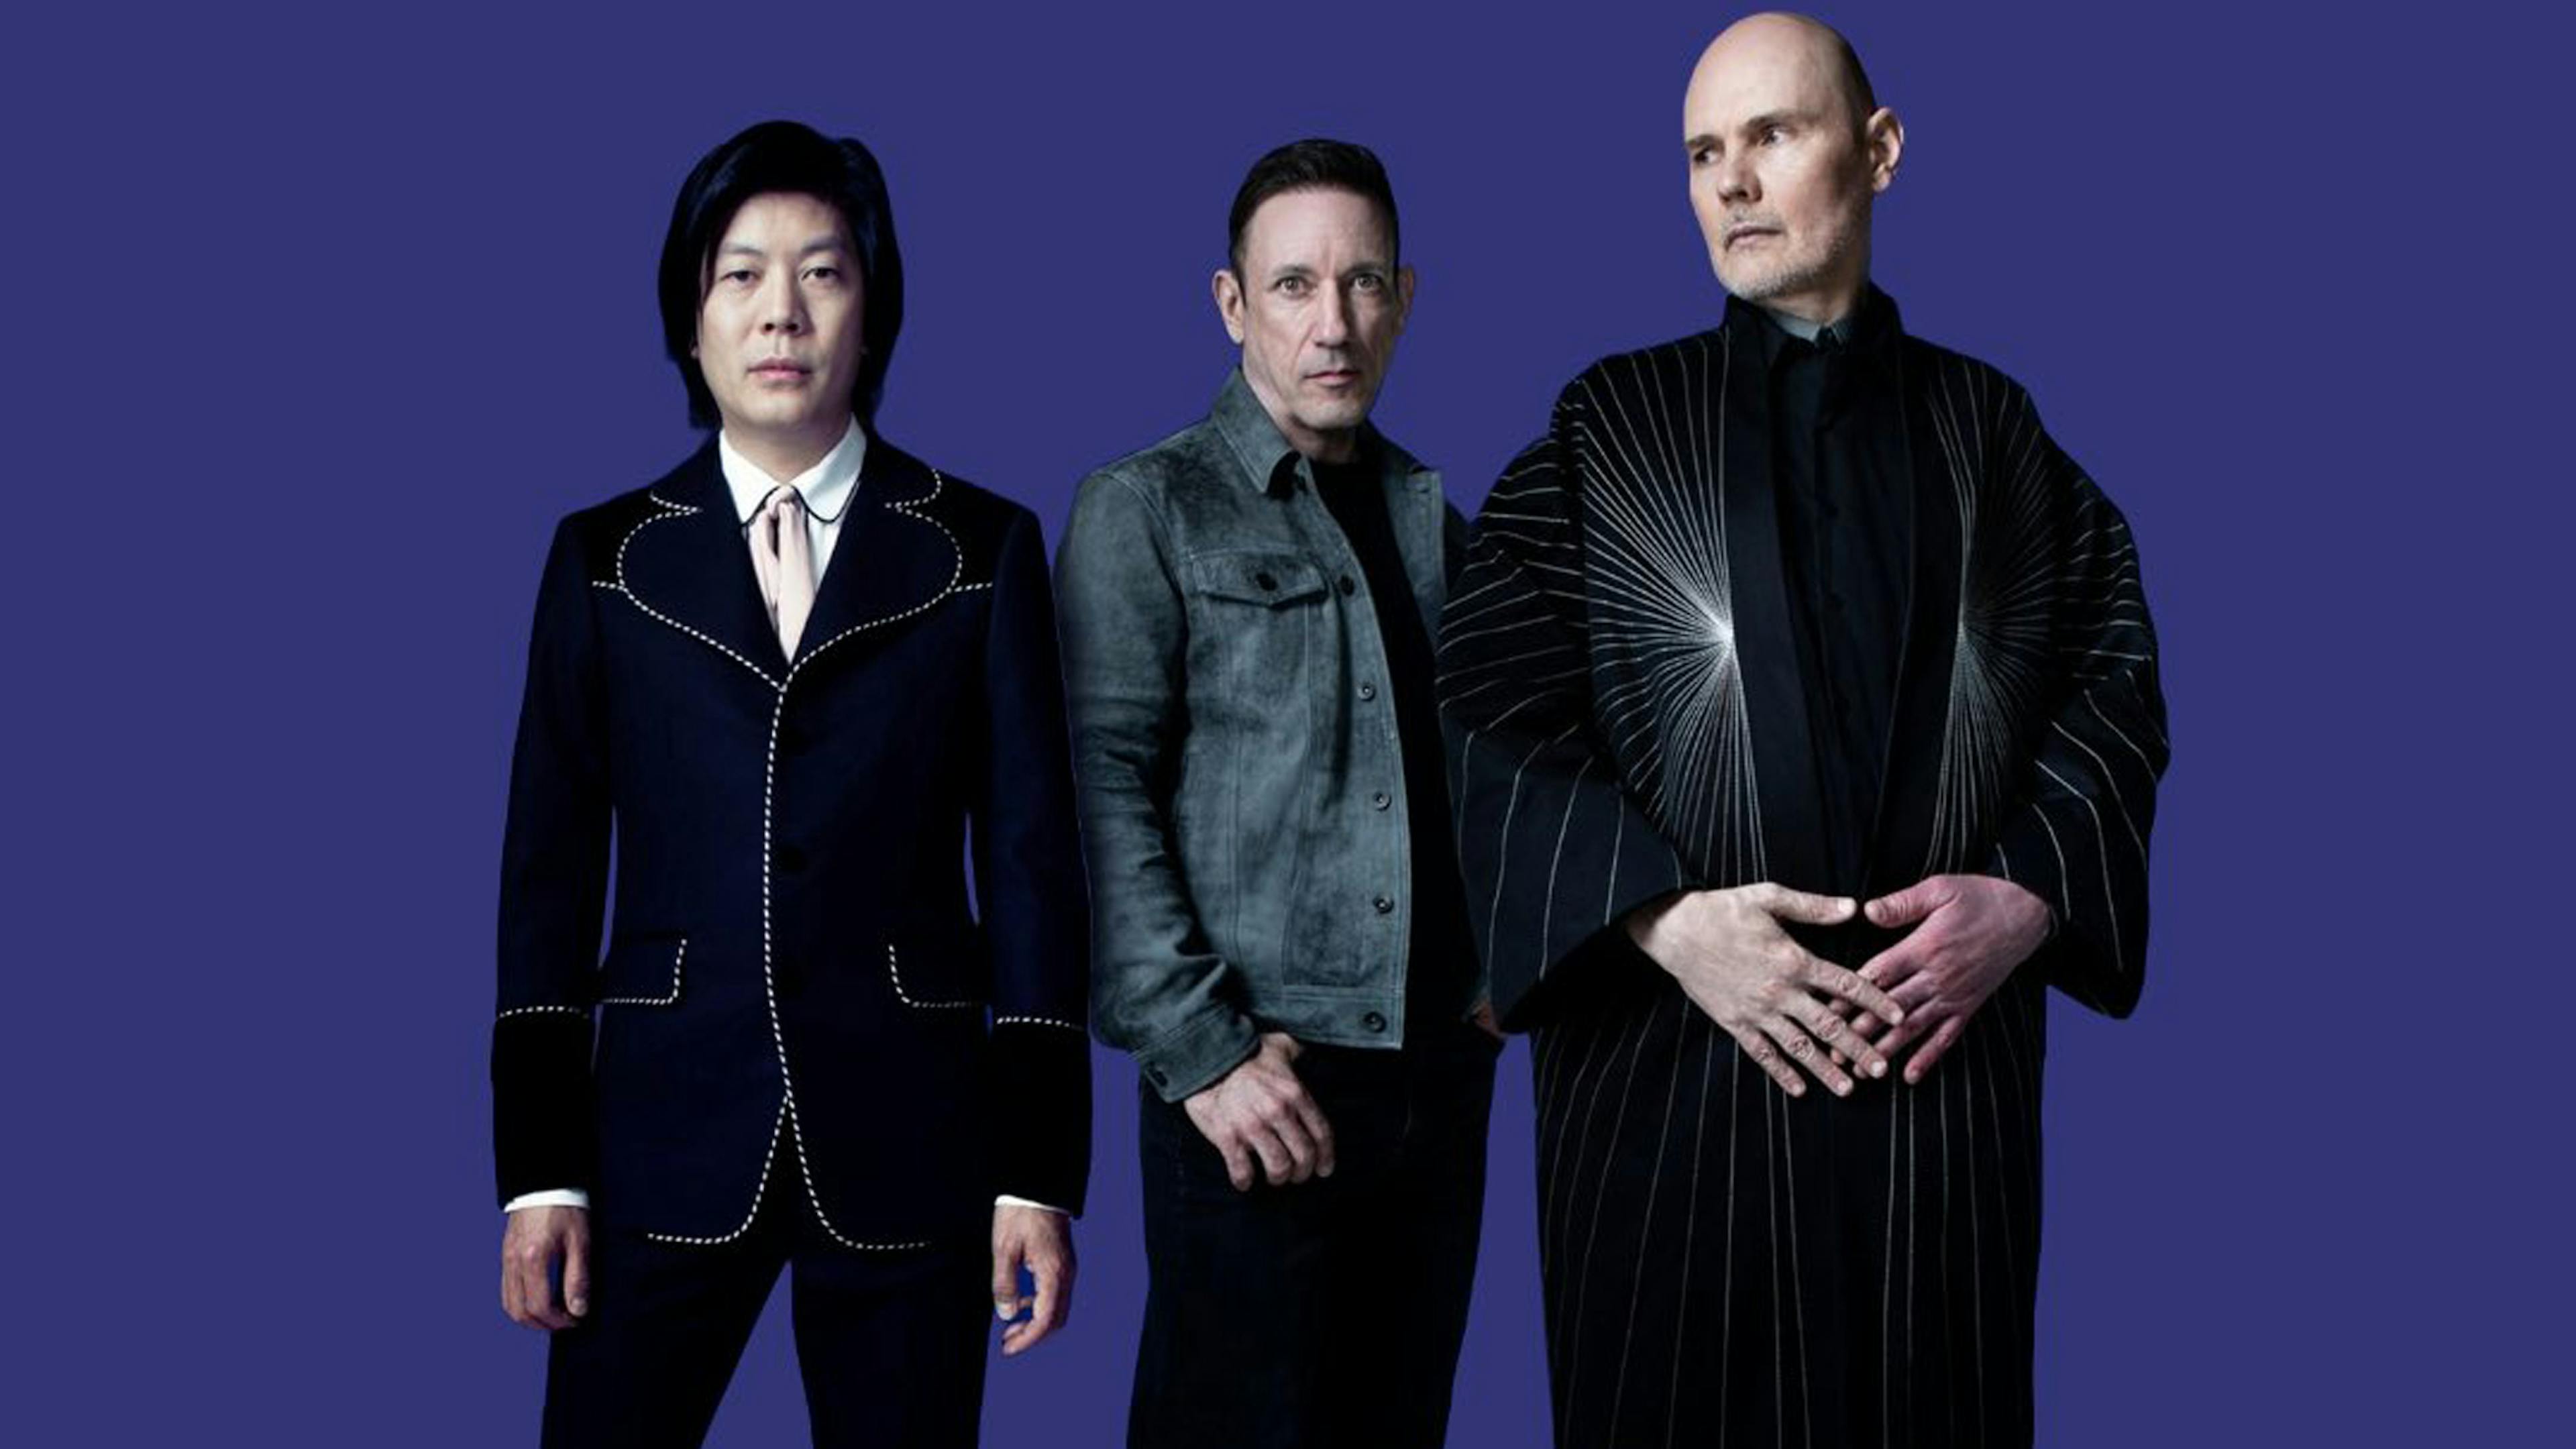 Smashing Pumpkins are reviewing over 10,000 applications to be their new guitarist